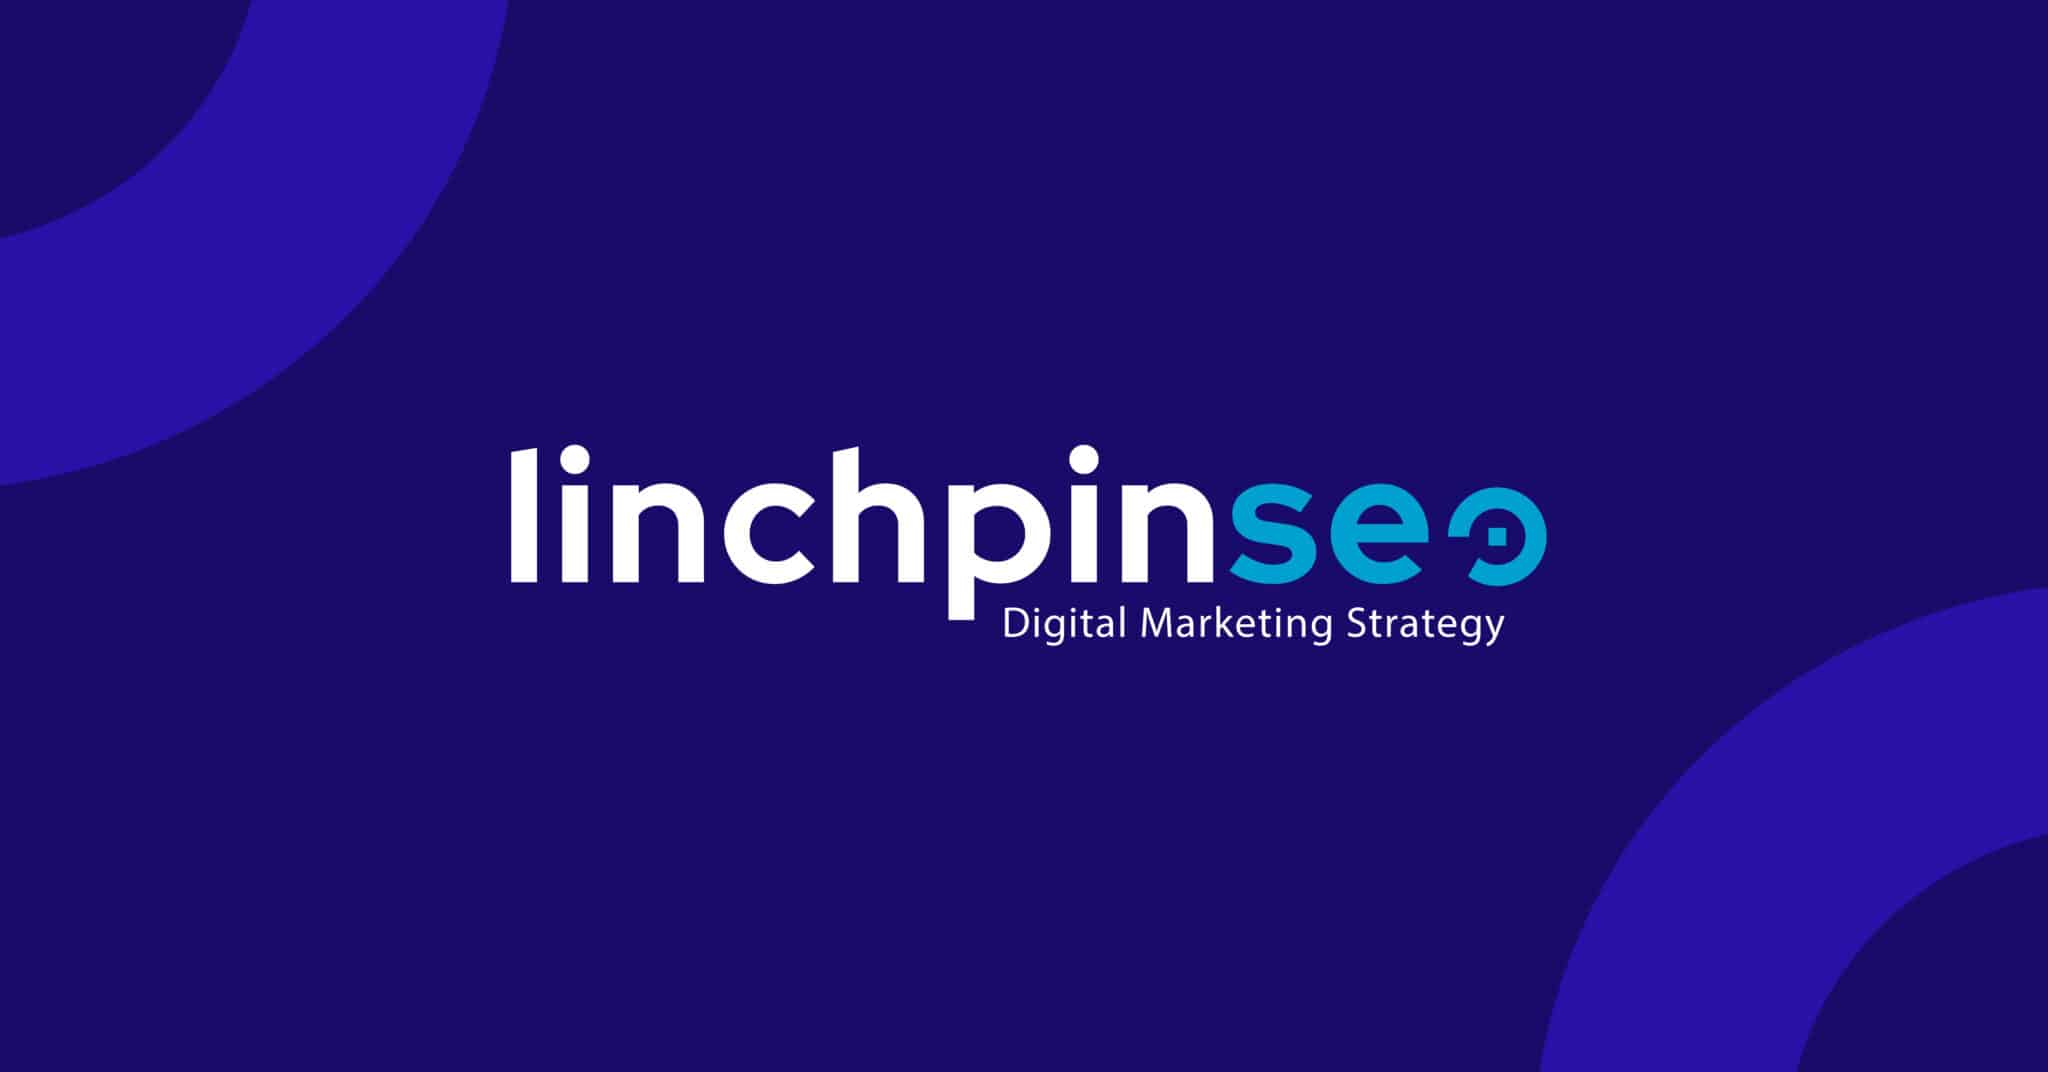 The-Guide-to-Digital-Marketing-For-Professional-Services-Companies-Linchpin-SEO.jpg